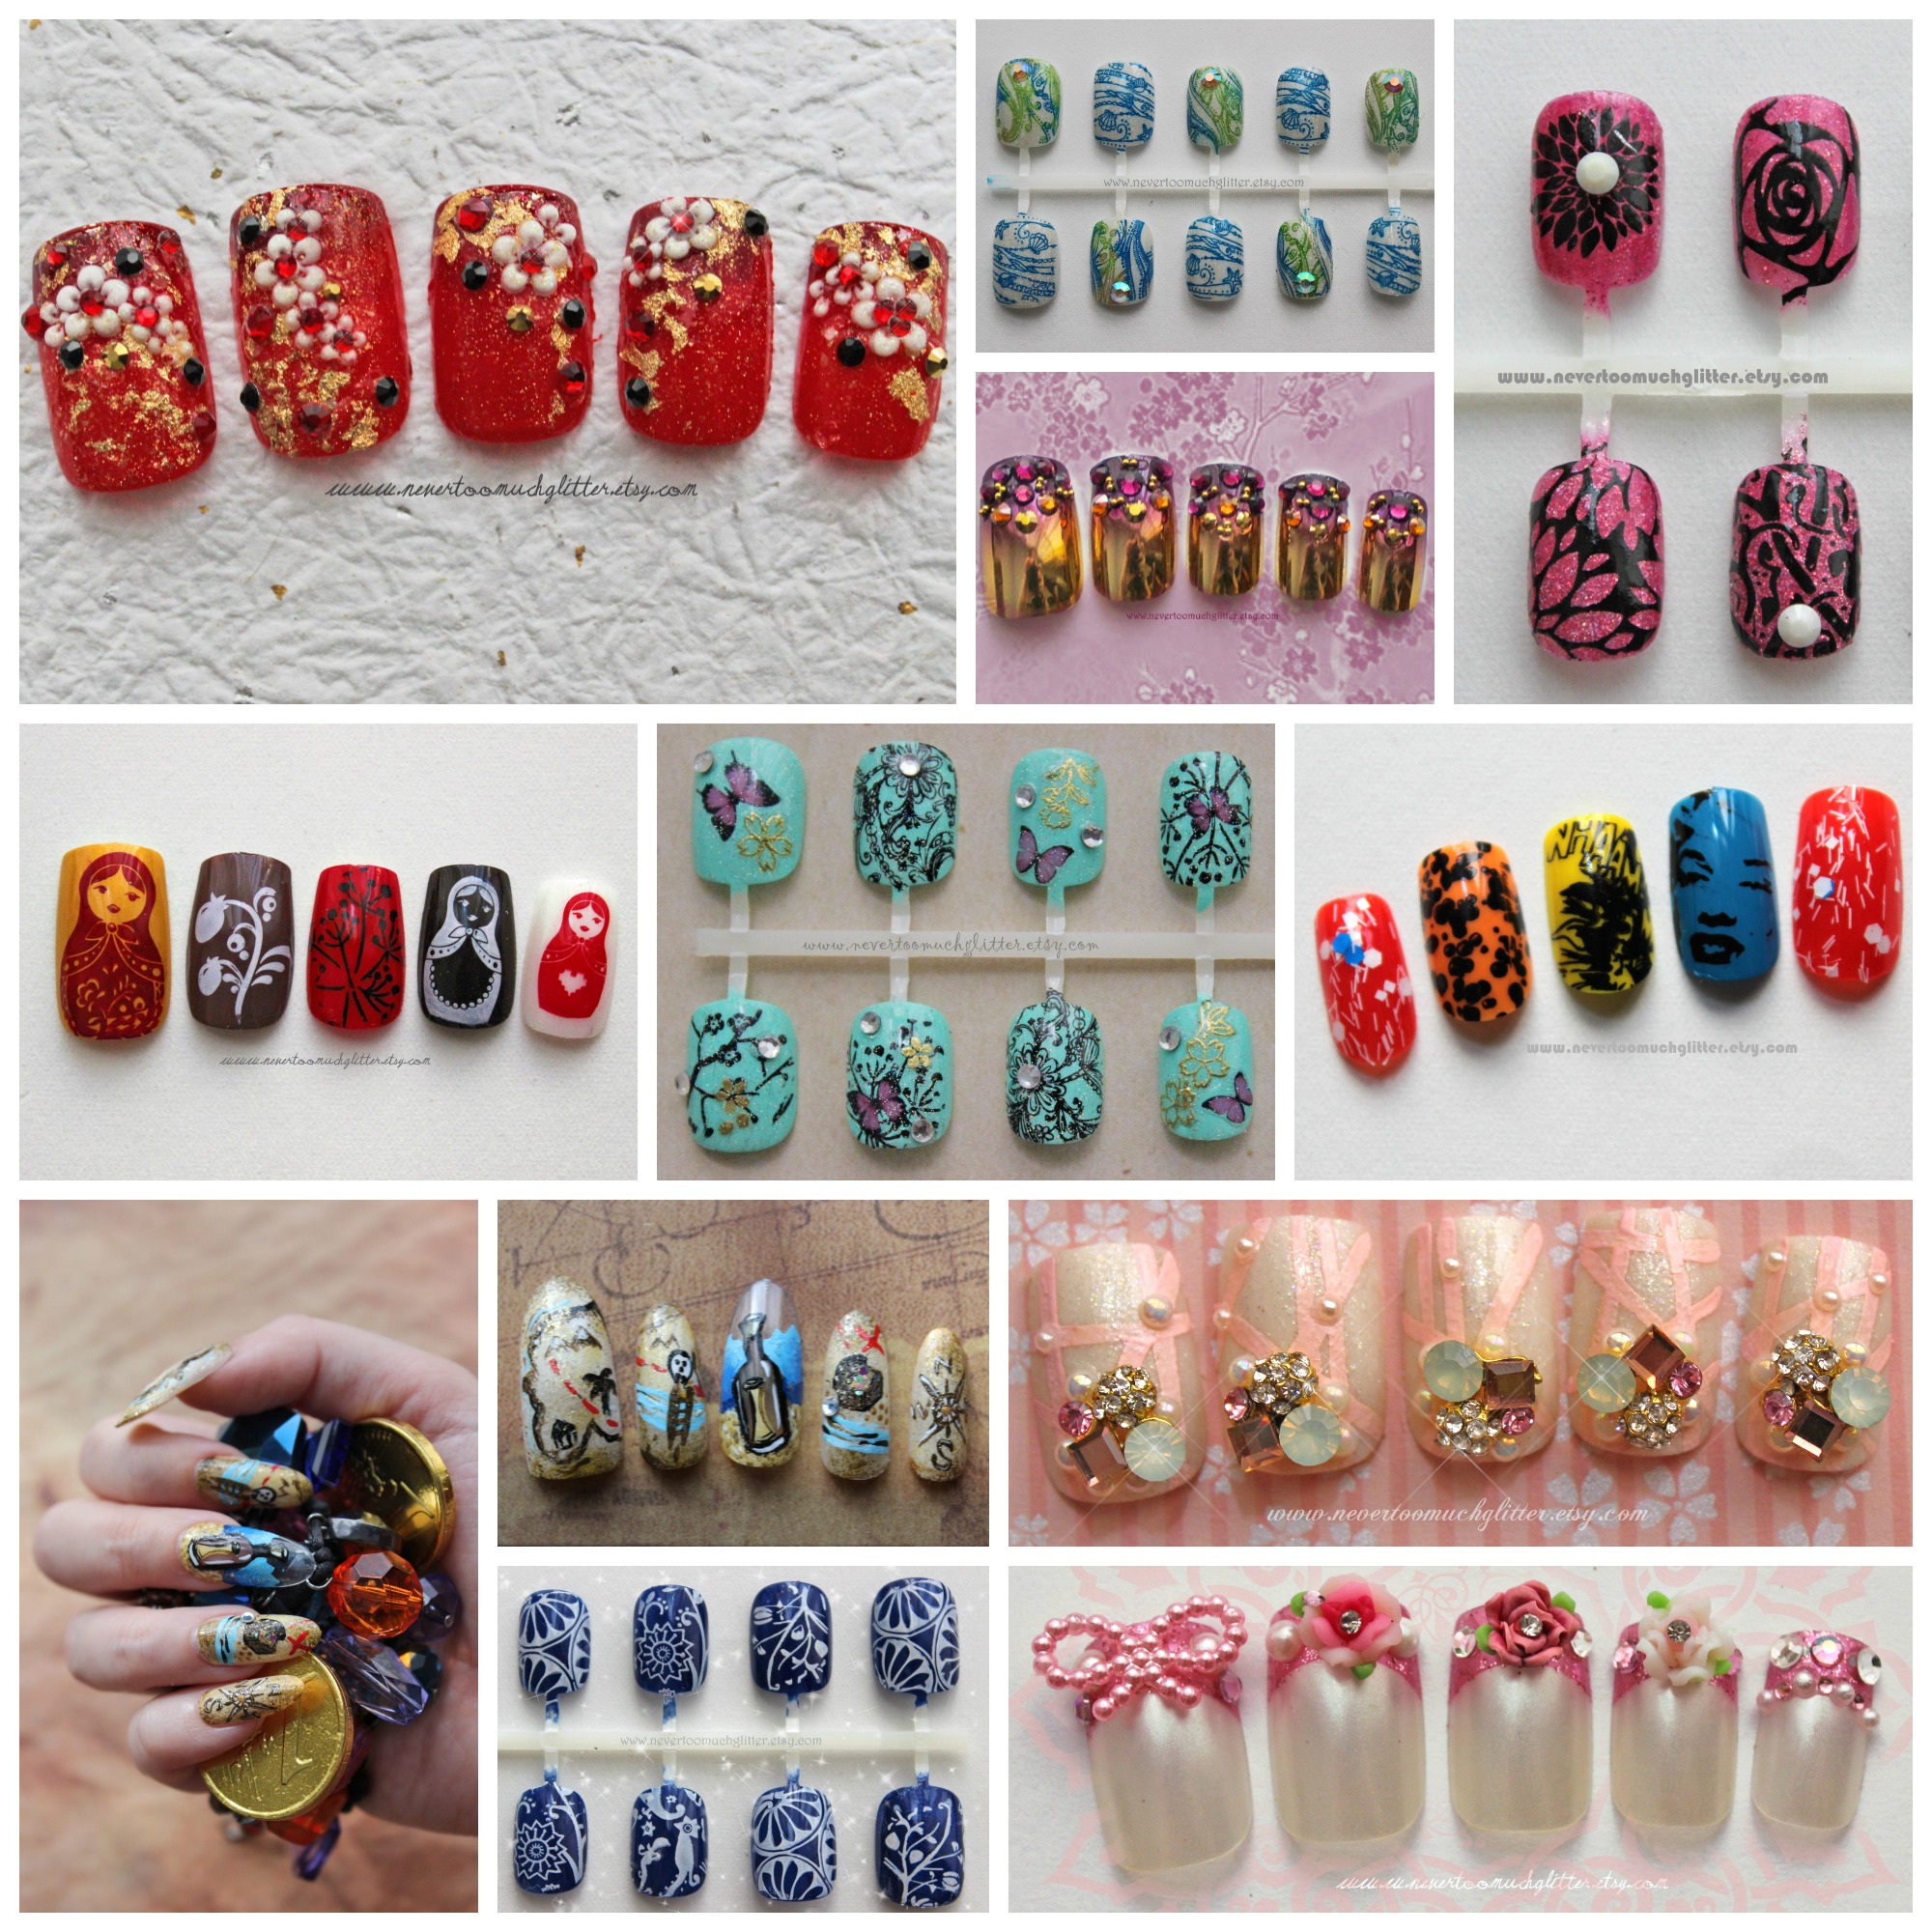 NAIL ART 2022 Colors Styles Shapes & Trends | eBay